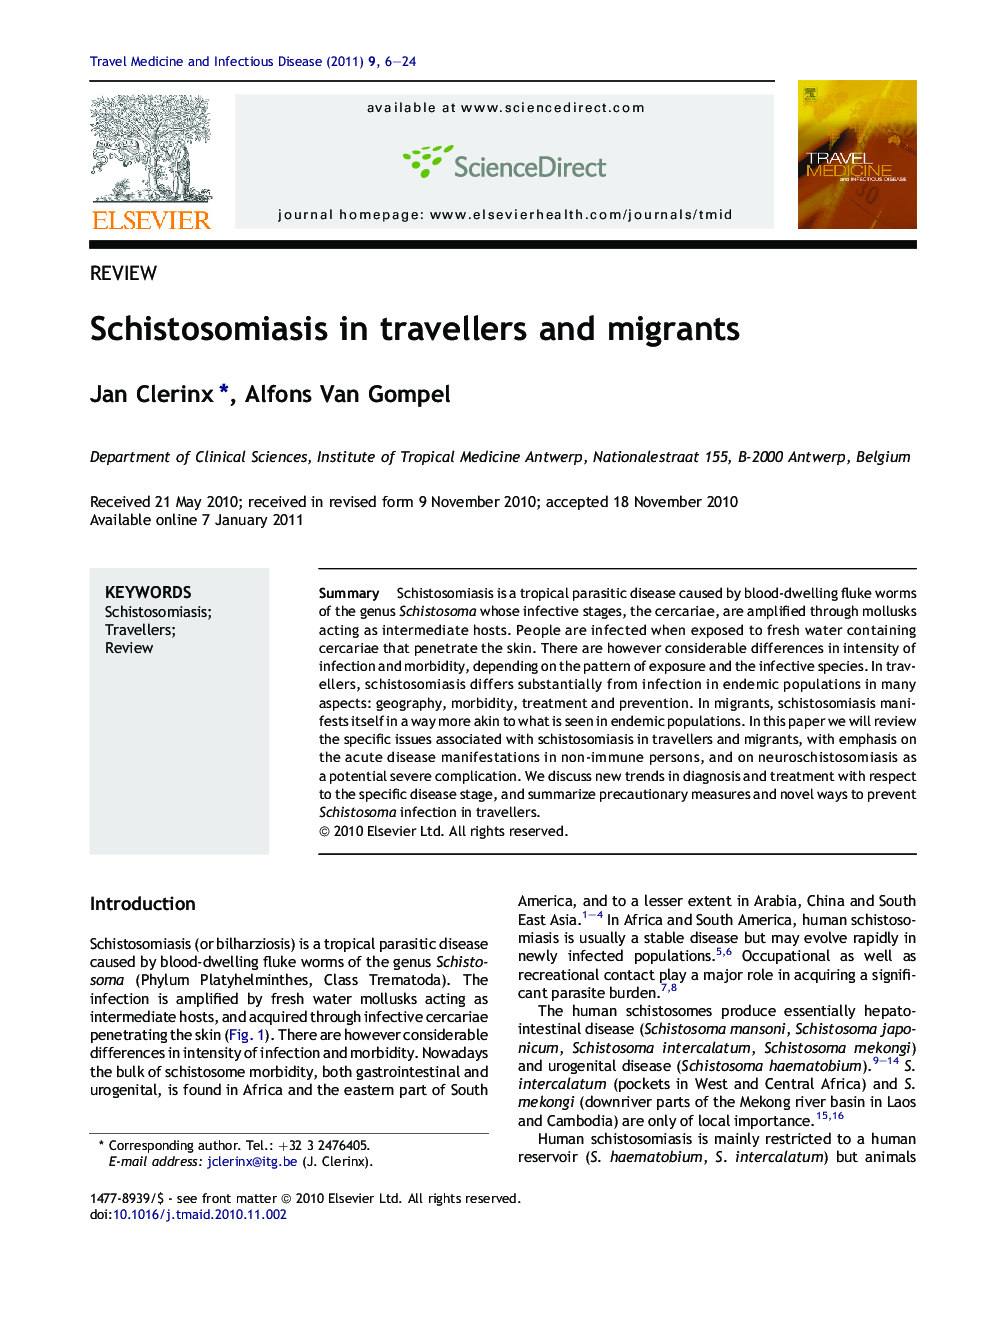 Schistosomiasis in travellers and migrants